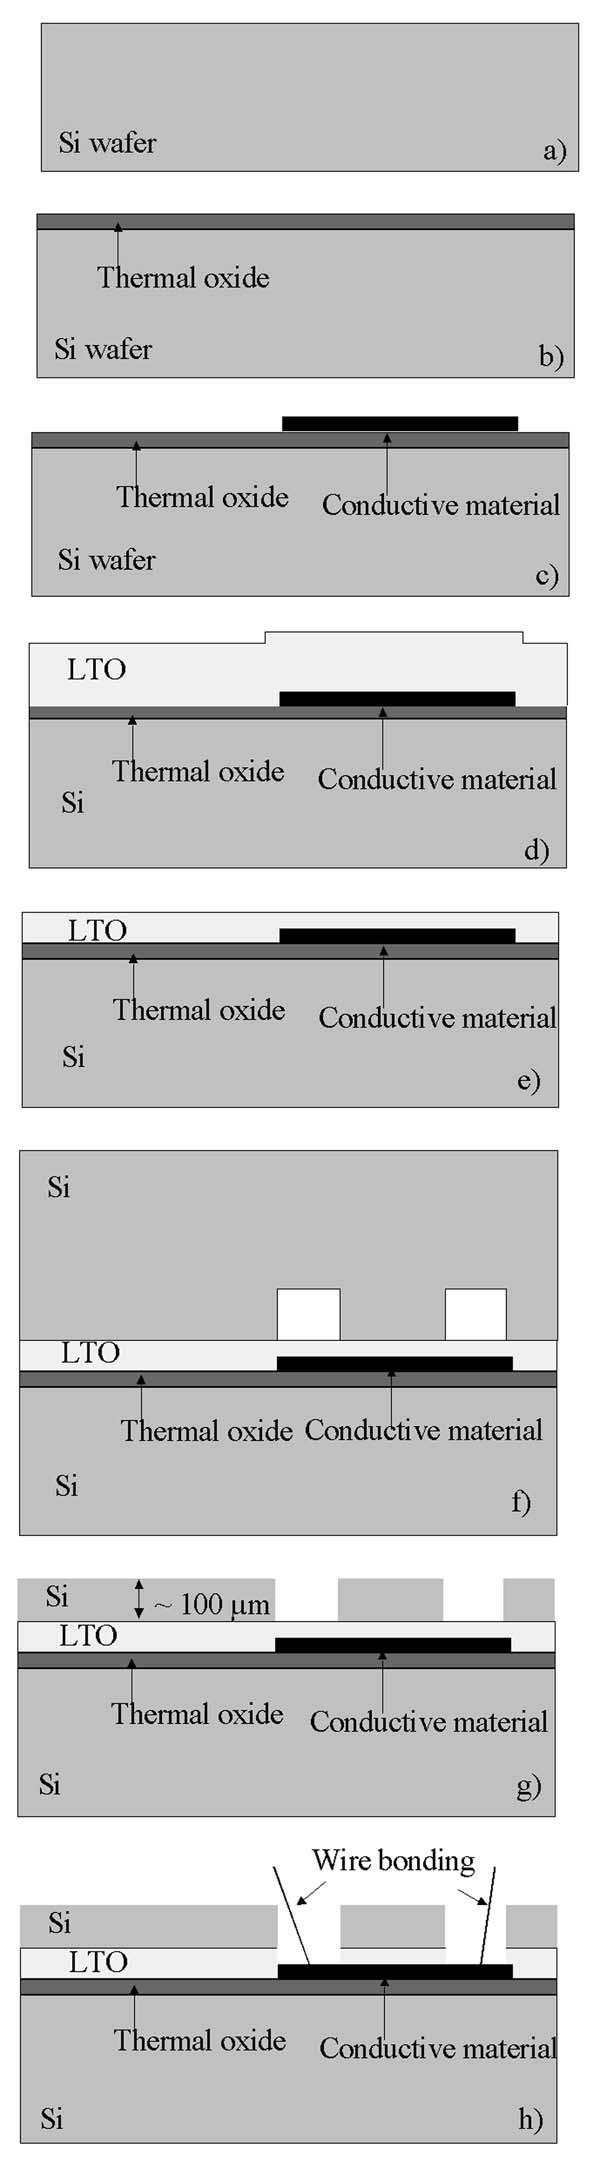 Journal of The Electrochemical Society, 153 1 G78-G82 2006 G79 Figure 2.